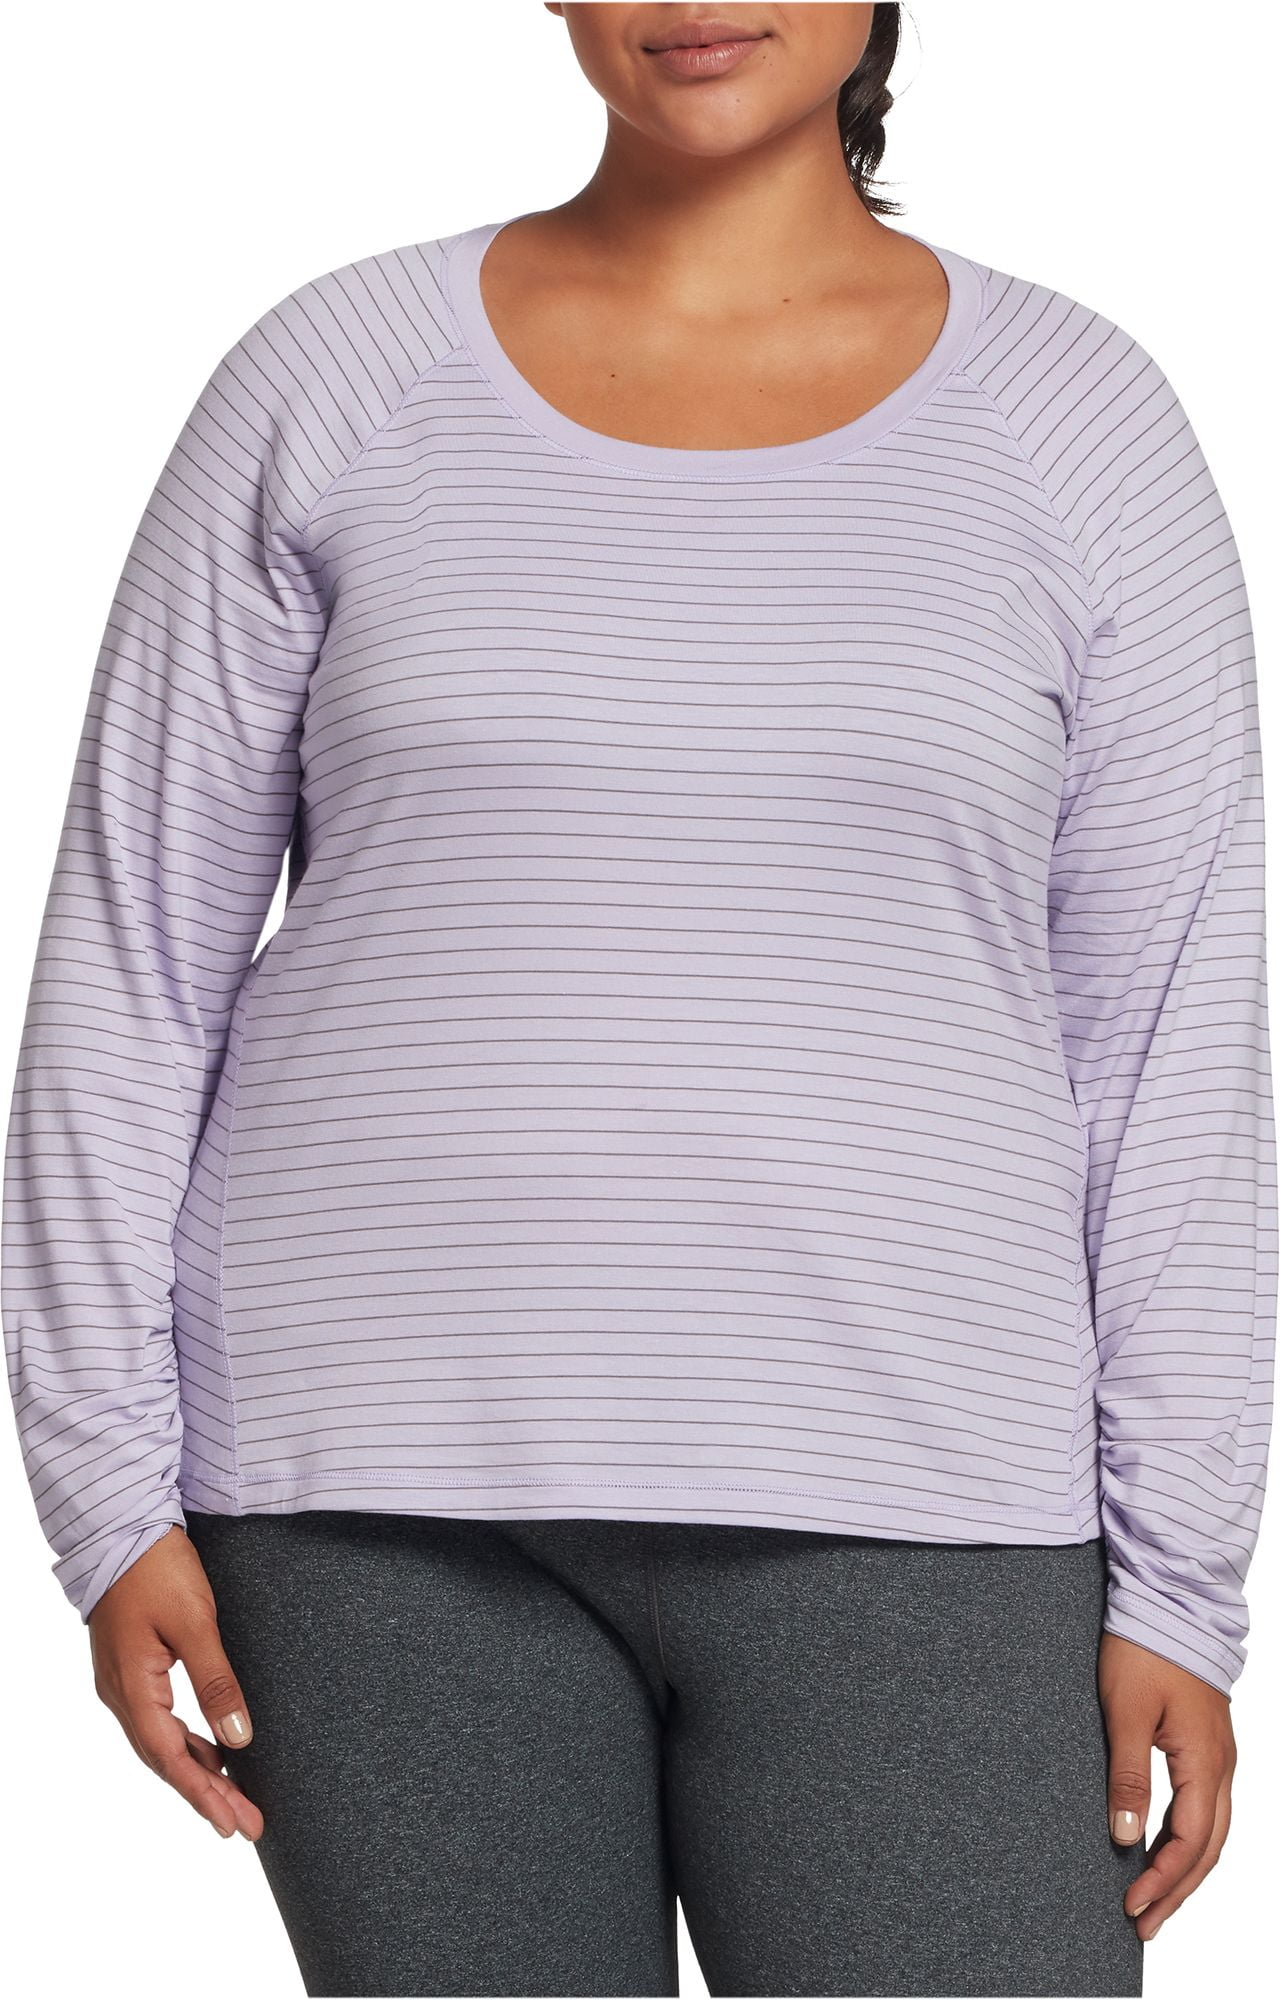 Calia - CALIA by Carrie Underwood Women's Plus Size Everyday Long ...